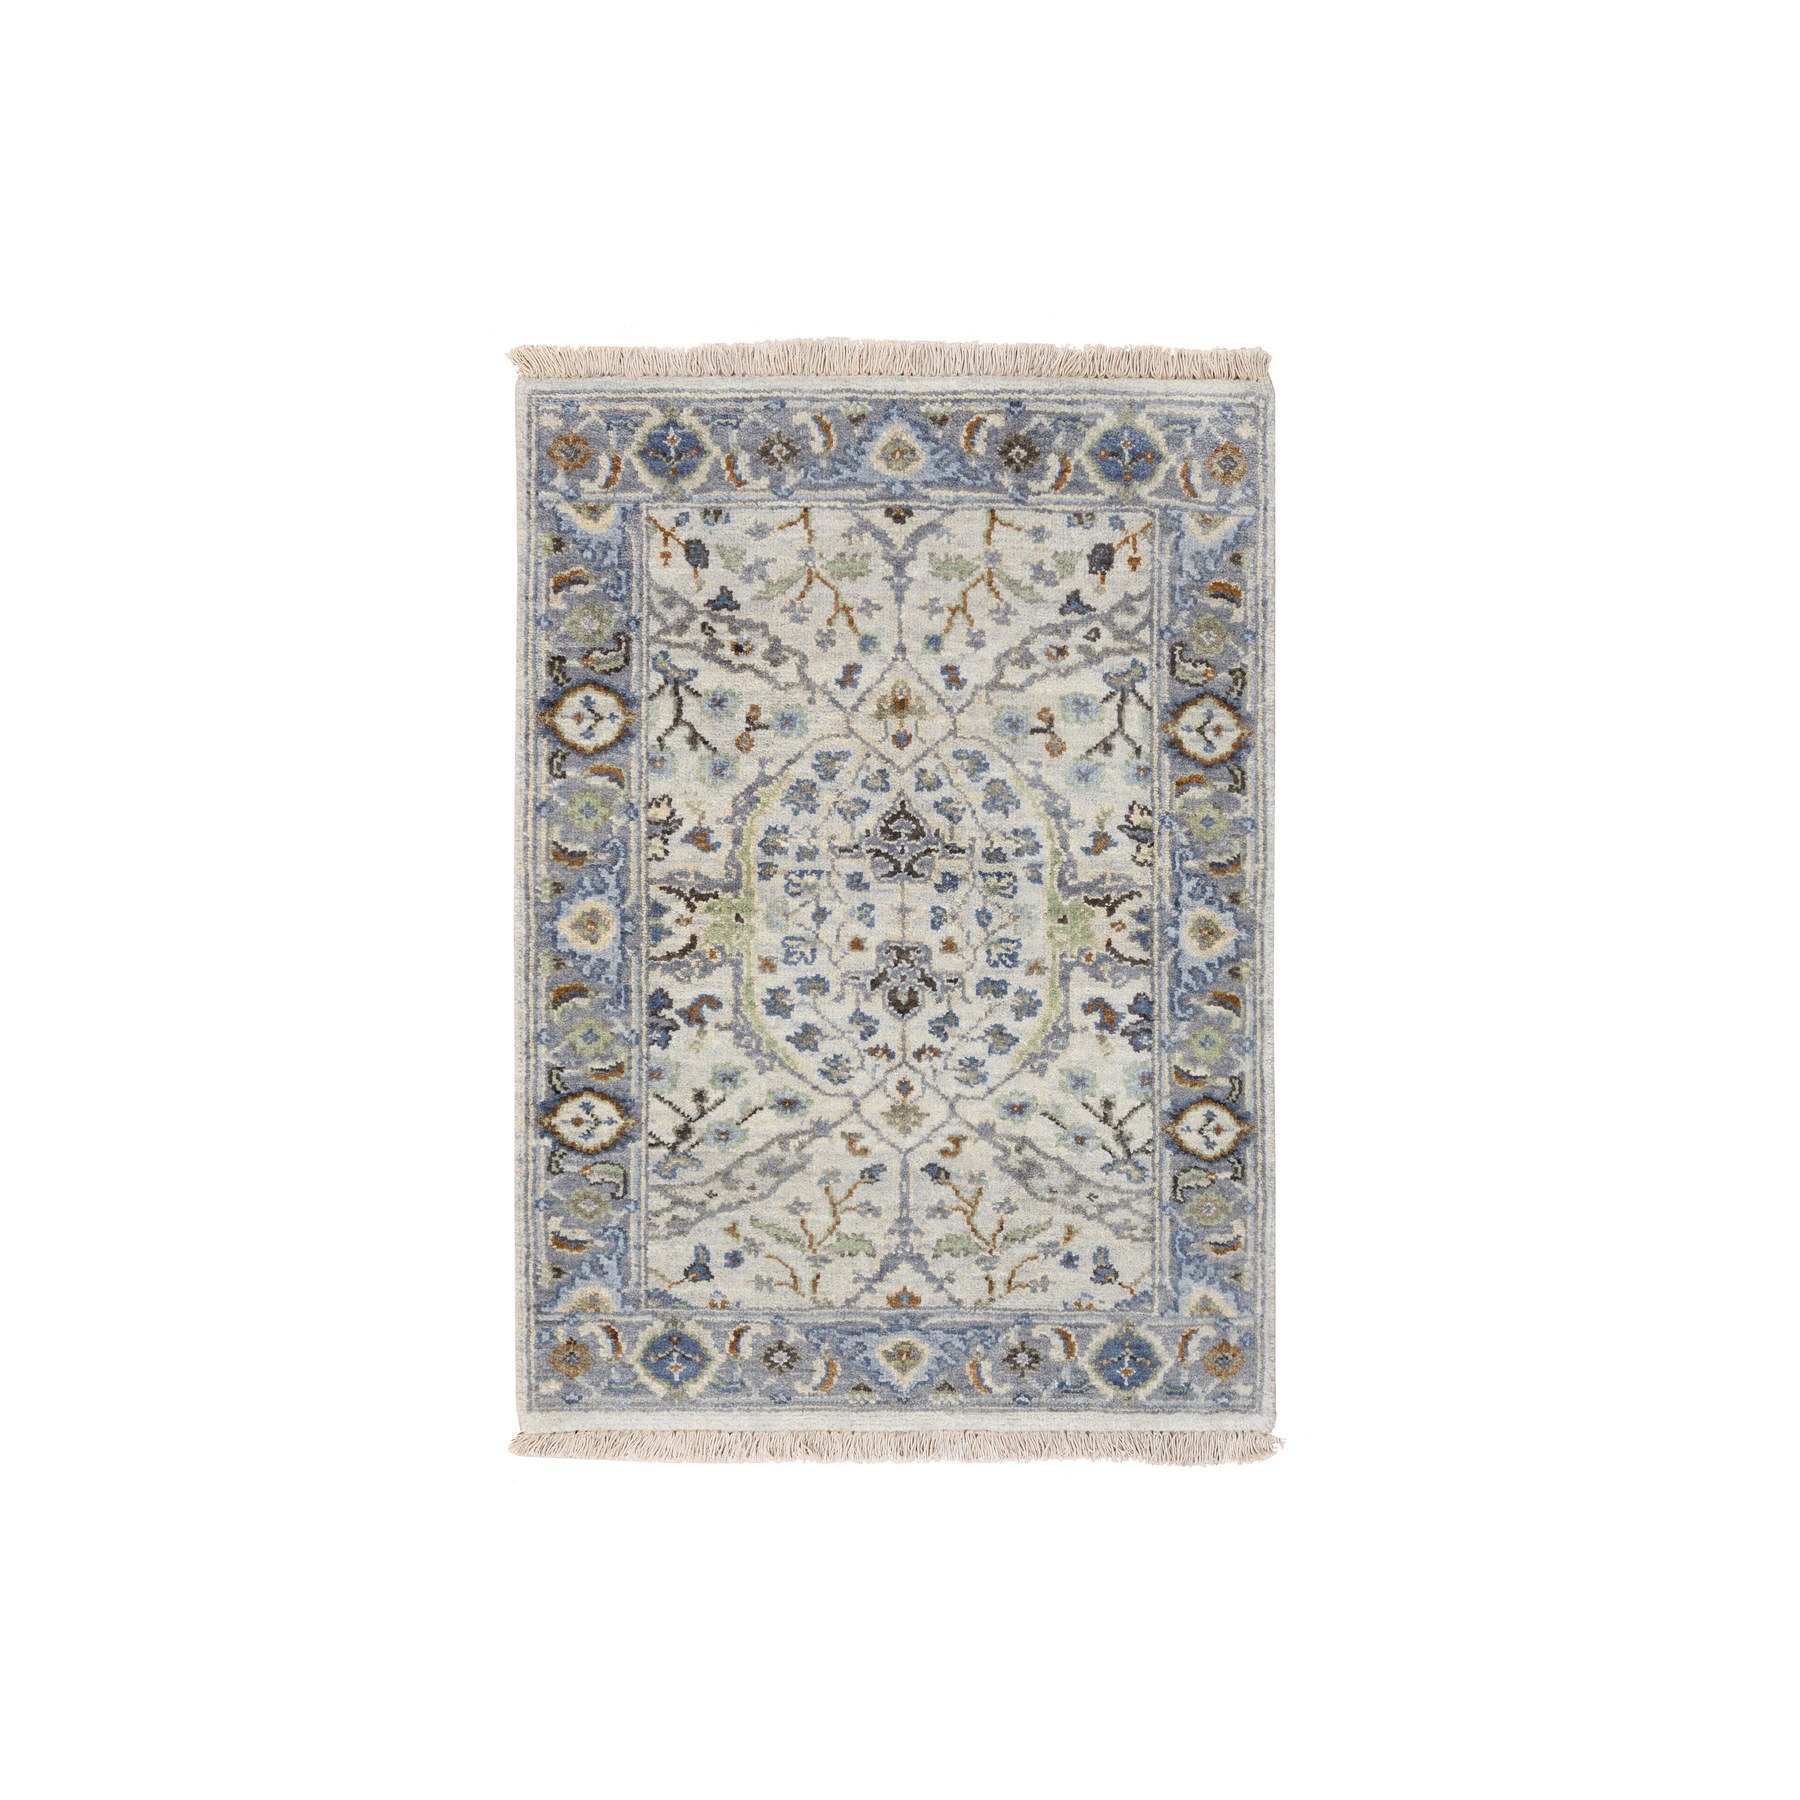 2'1"x3' Gray Oushak Hand Woven with All Over Design Dense Weave Wool Oriental Mat Rug 